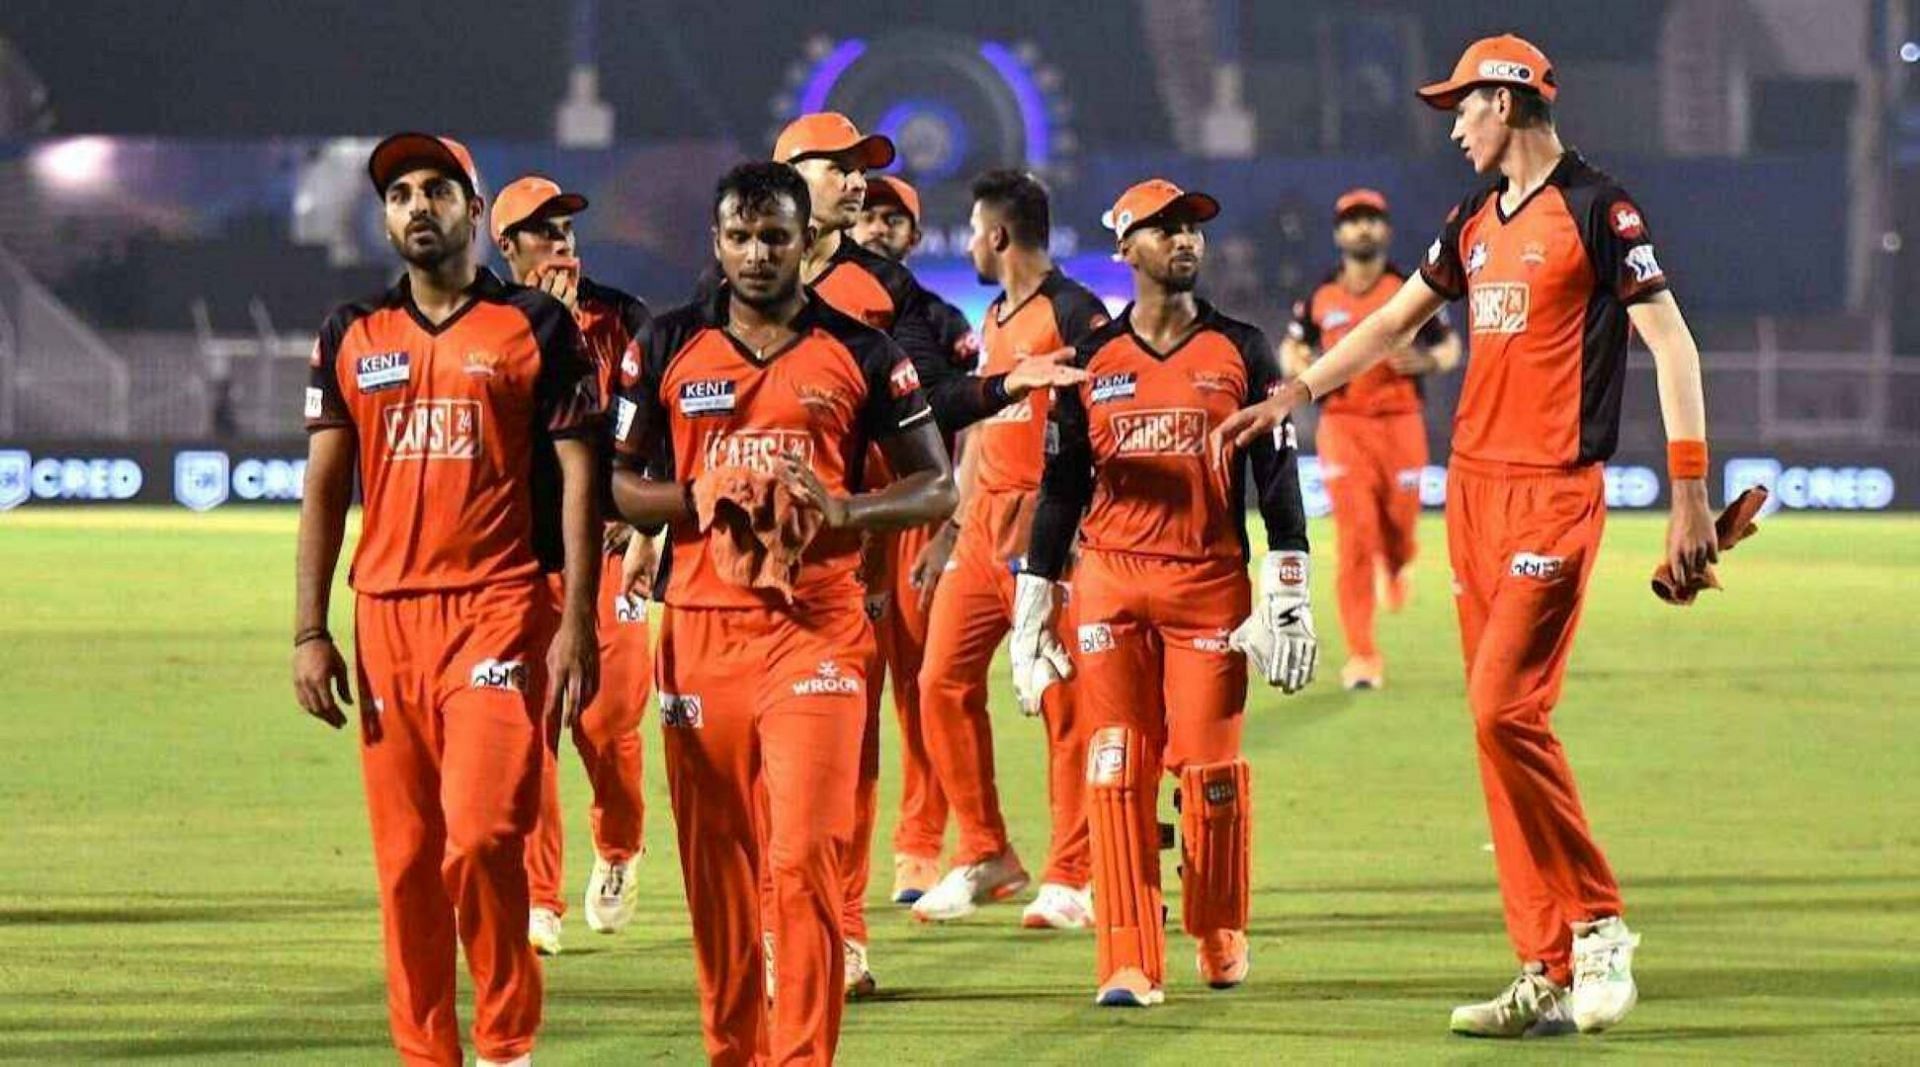 SRH were eliminated from the playoffs for a third consecutive season